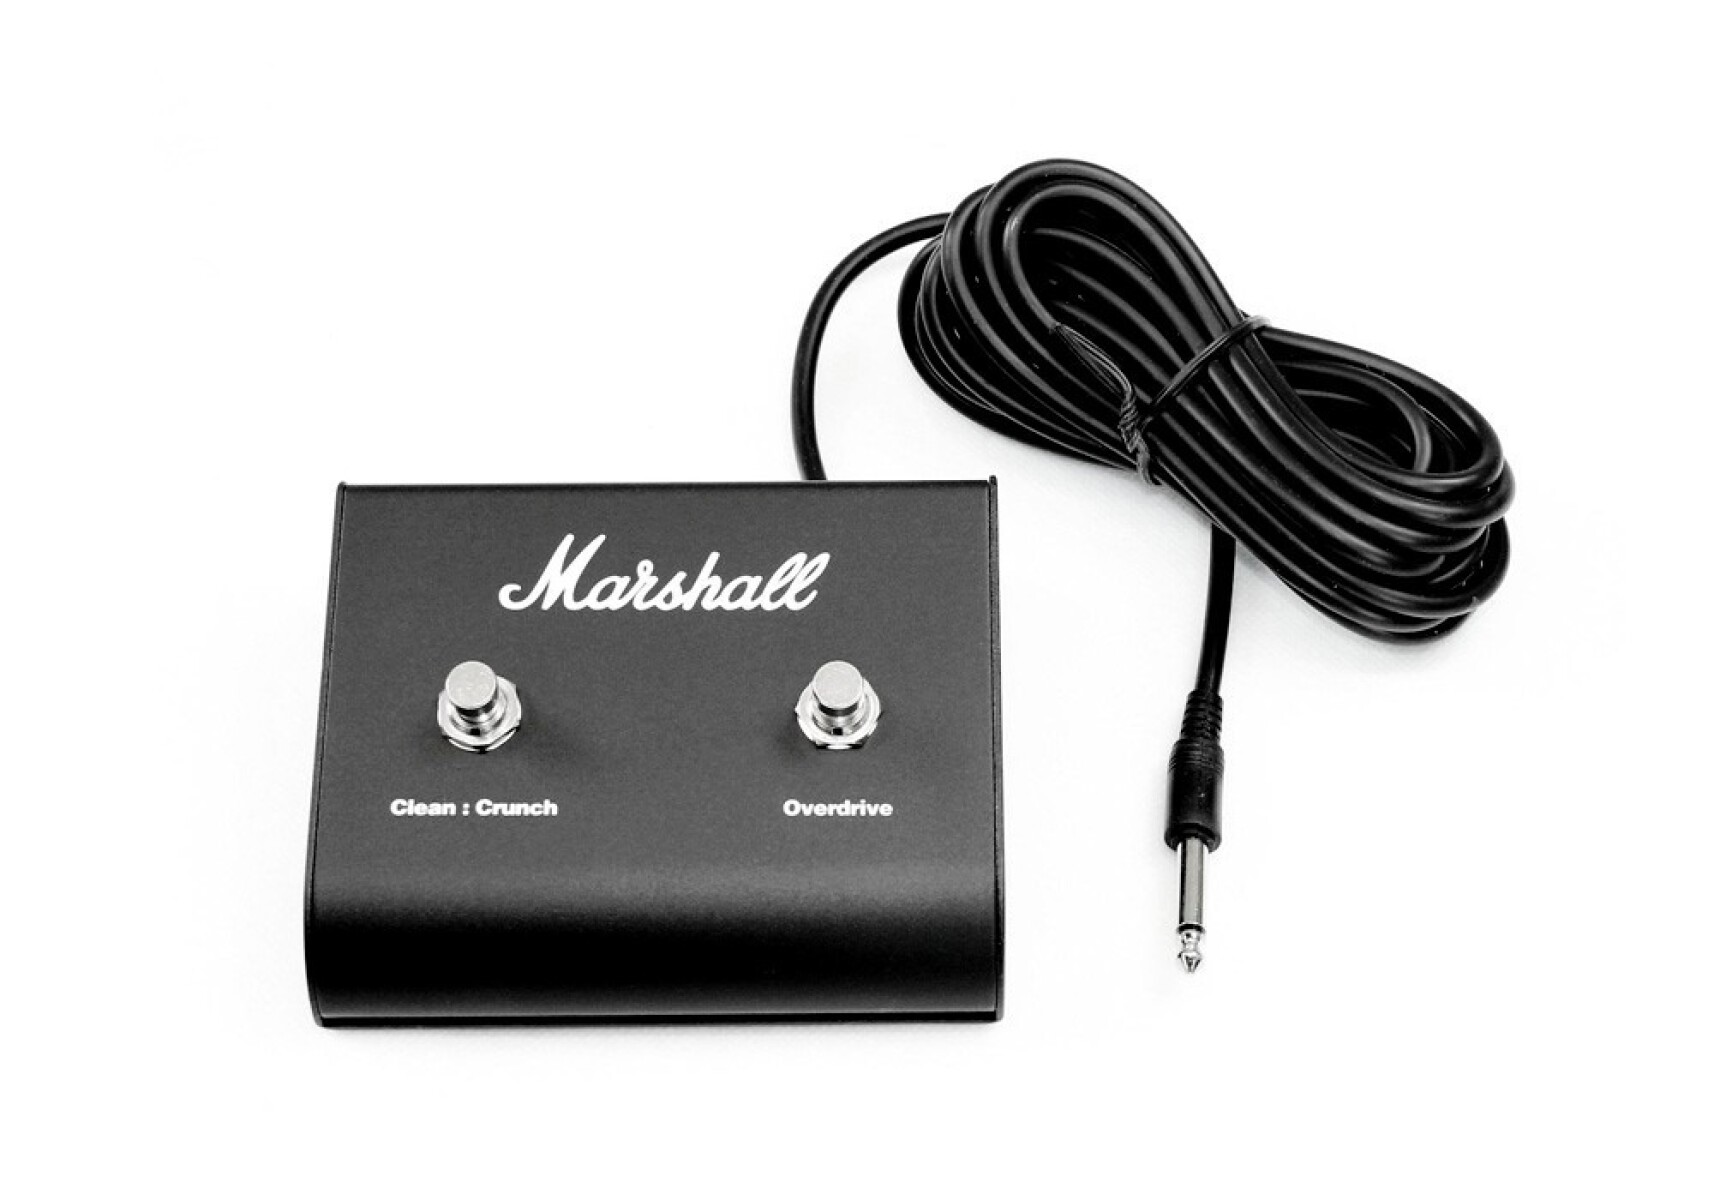 PEDAL FOOTSWITCH/MARSHALL PEDL90010 